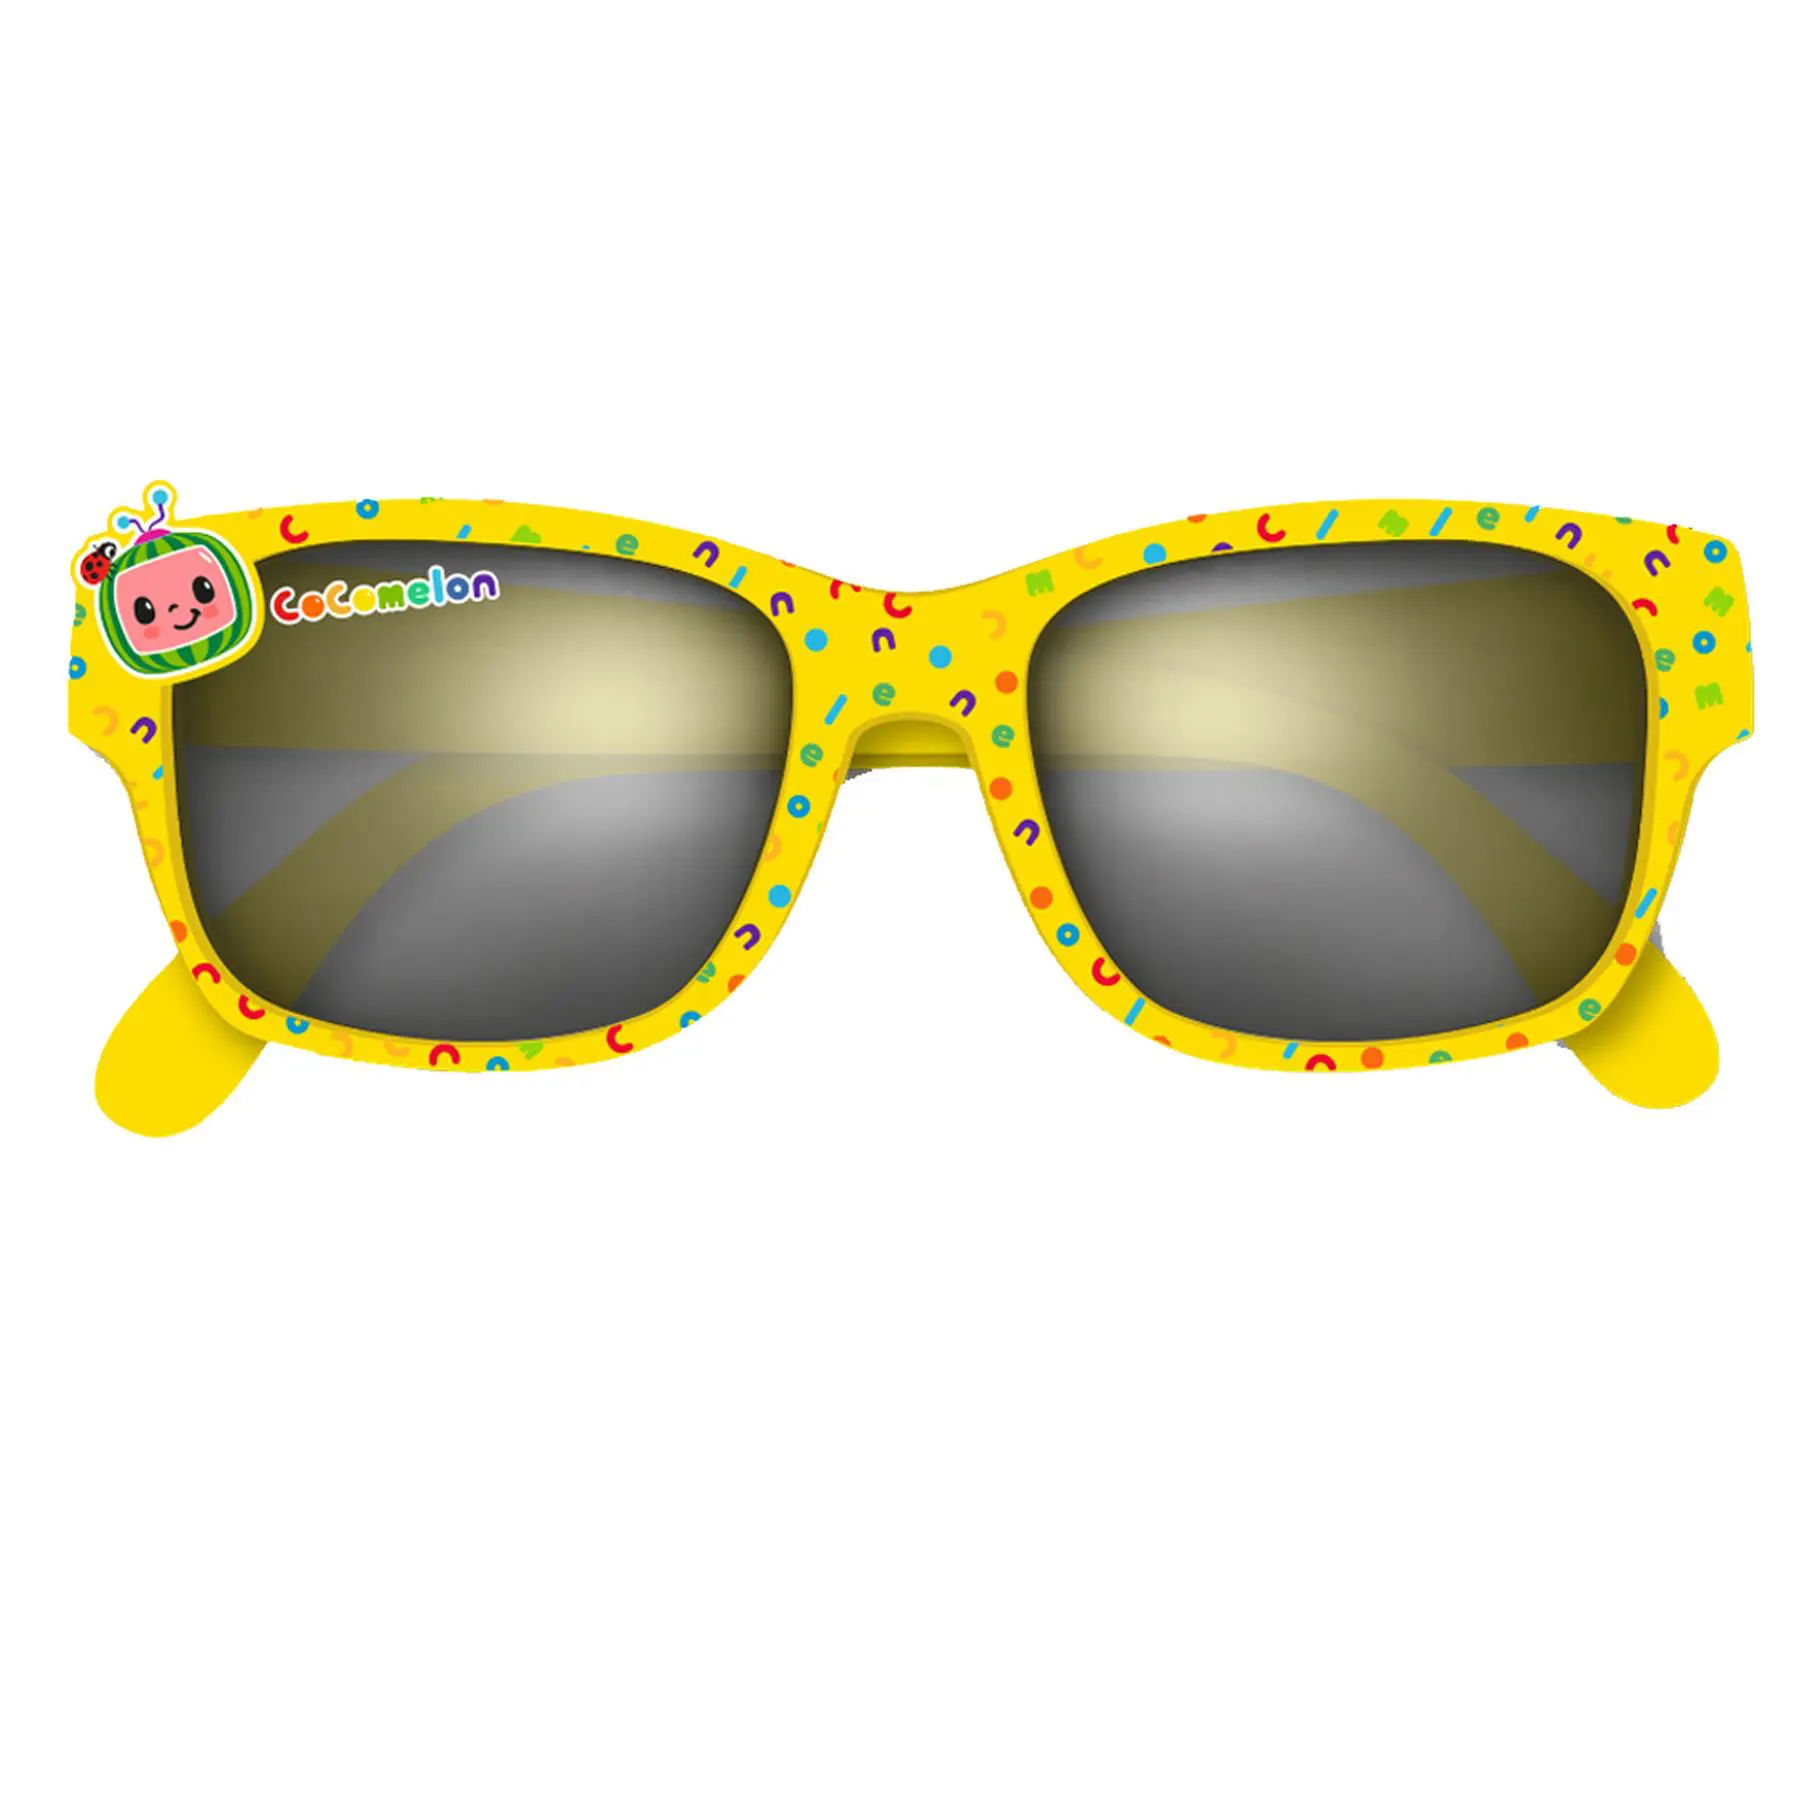 Cocomelon Children's Character Sunglasses UV protection for Holiday - Yellow COCOM1